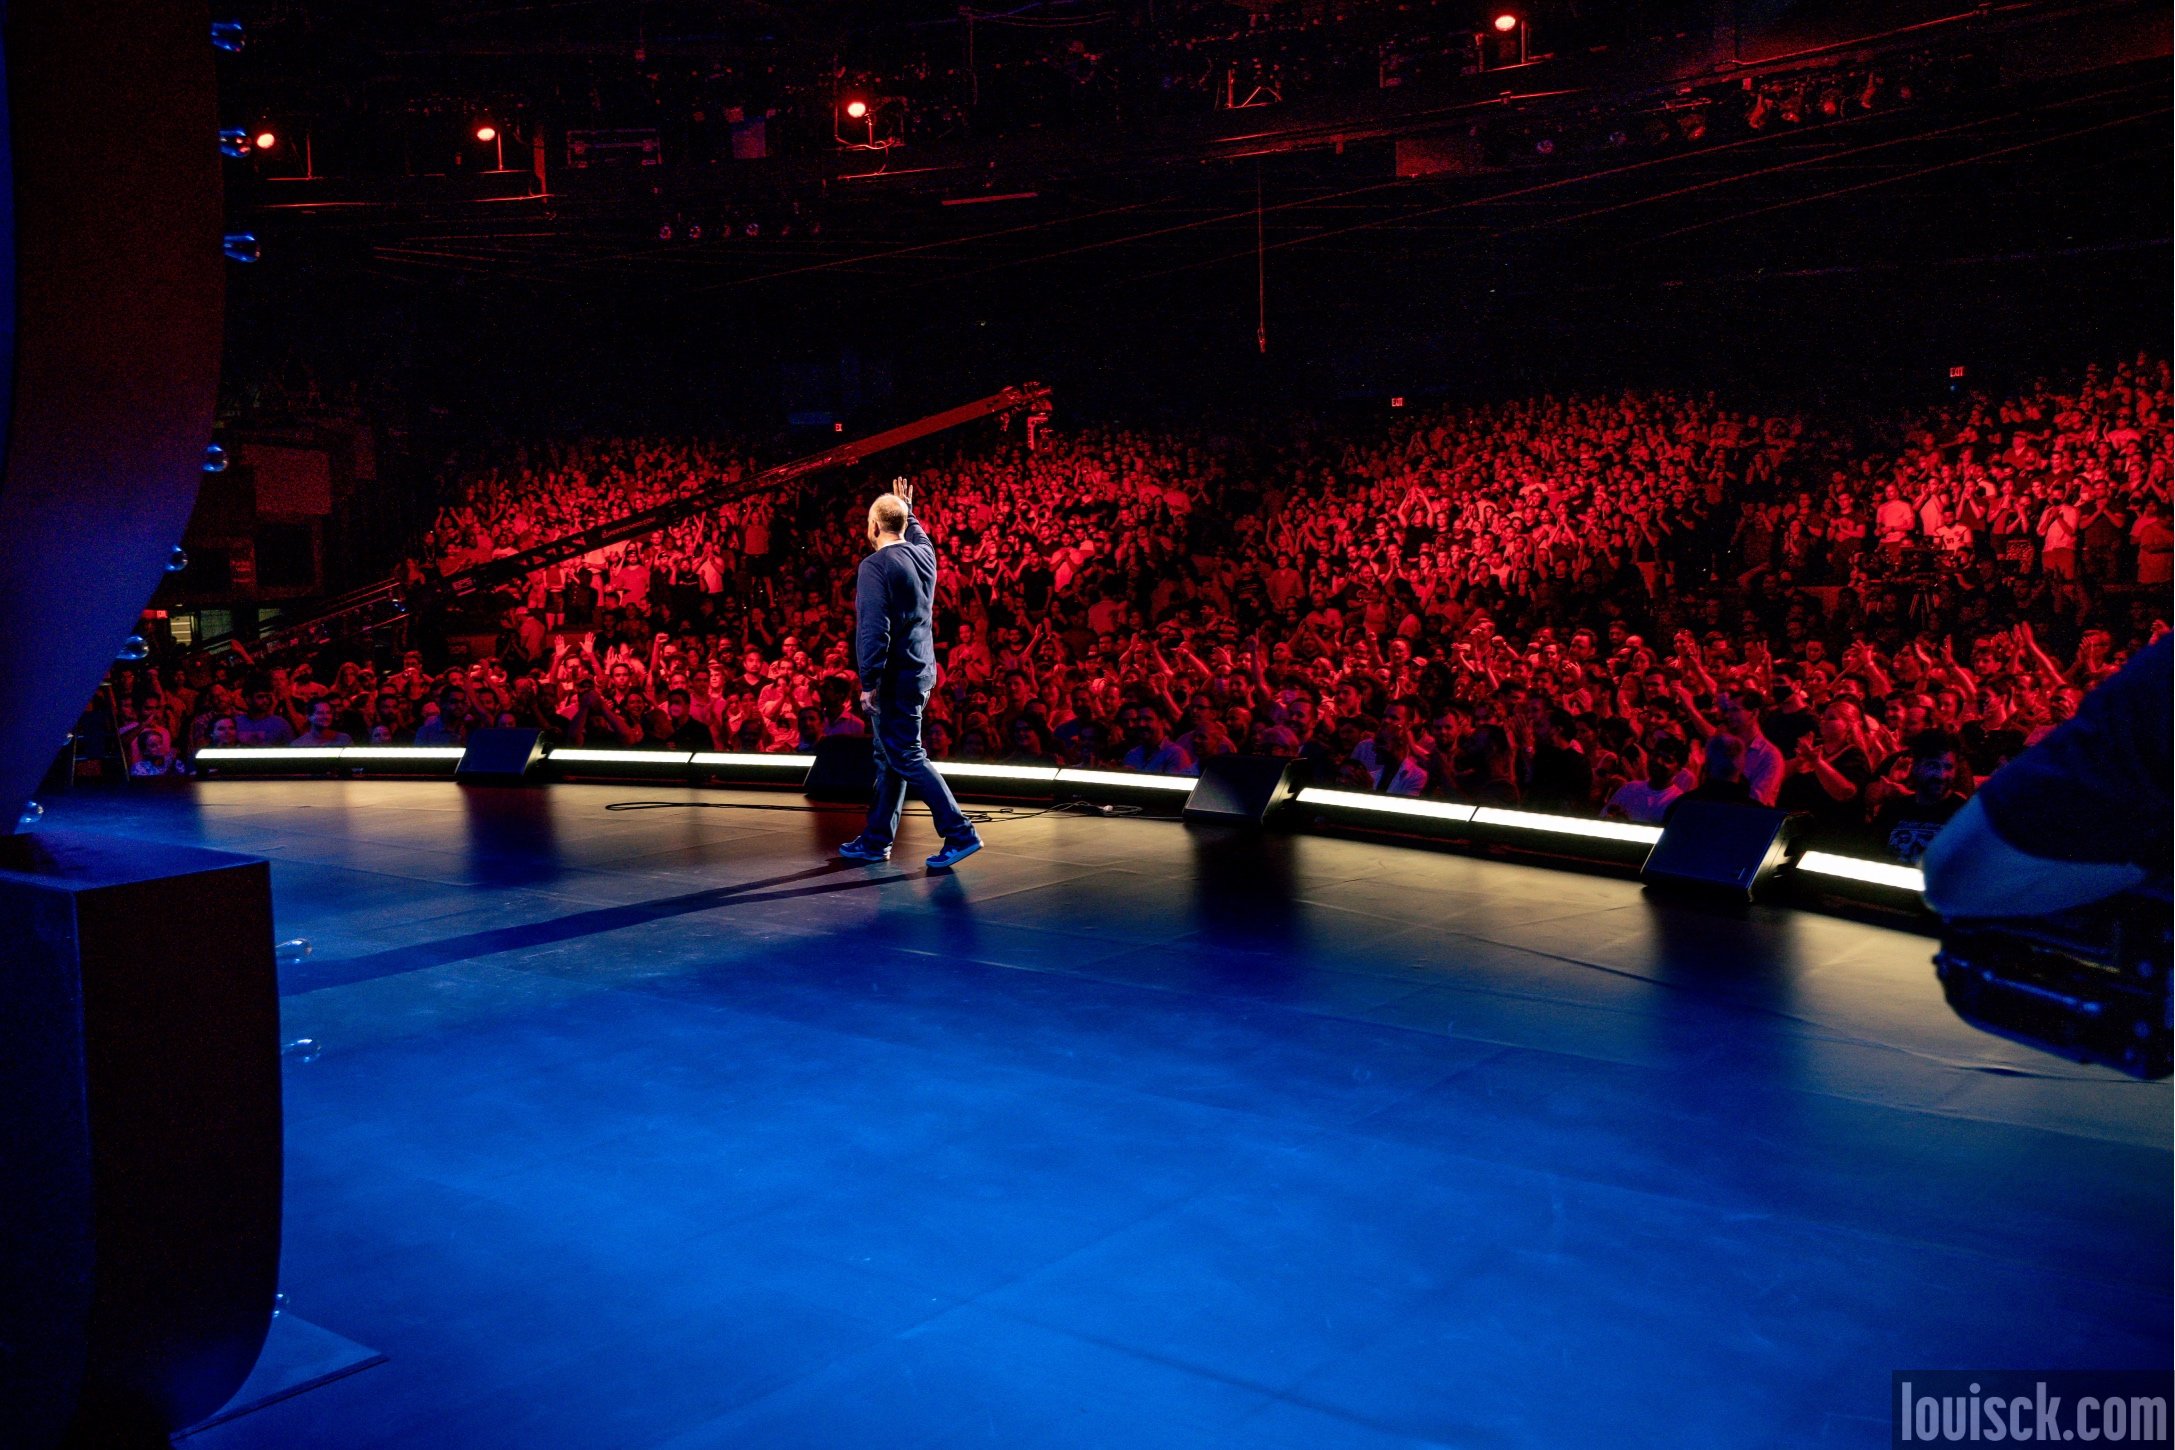 Photo 8 in 'LOUIS C.K. at MADISON SQUARE GARDEN' gallery showcasing lighting design by Mike Baldassari of Mike-O-Matic Industries LLC